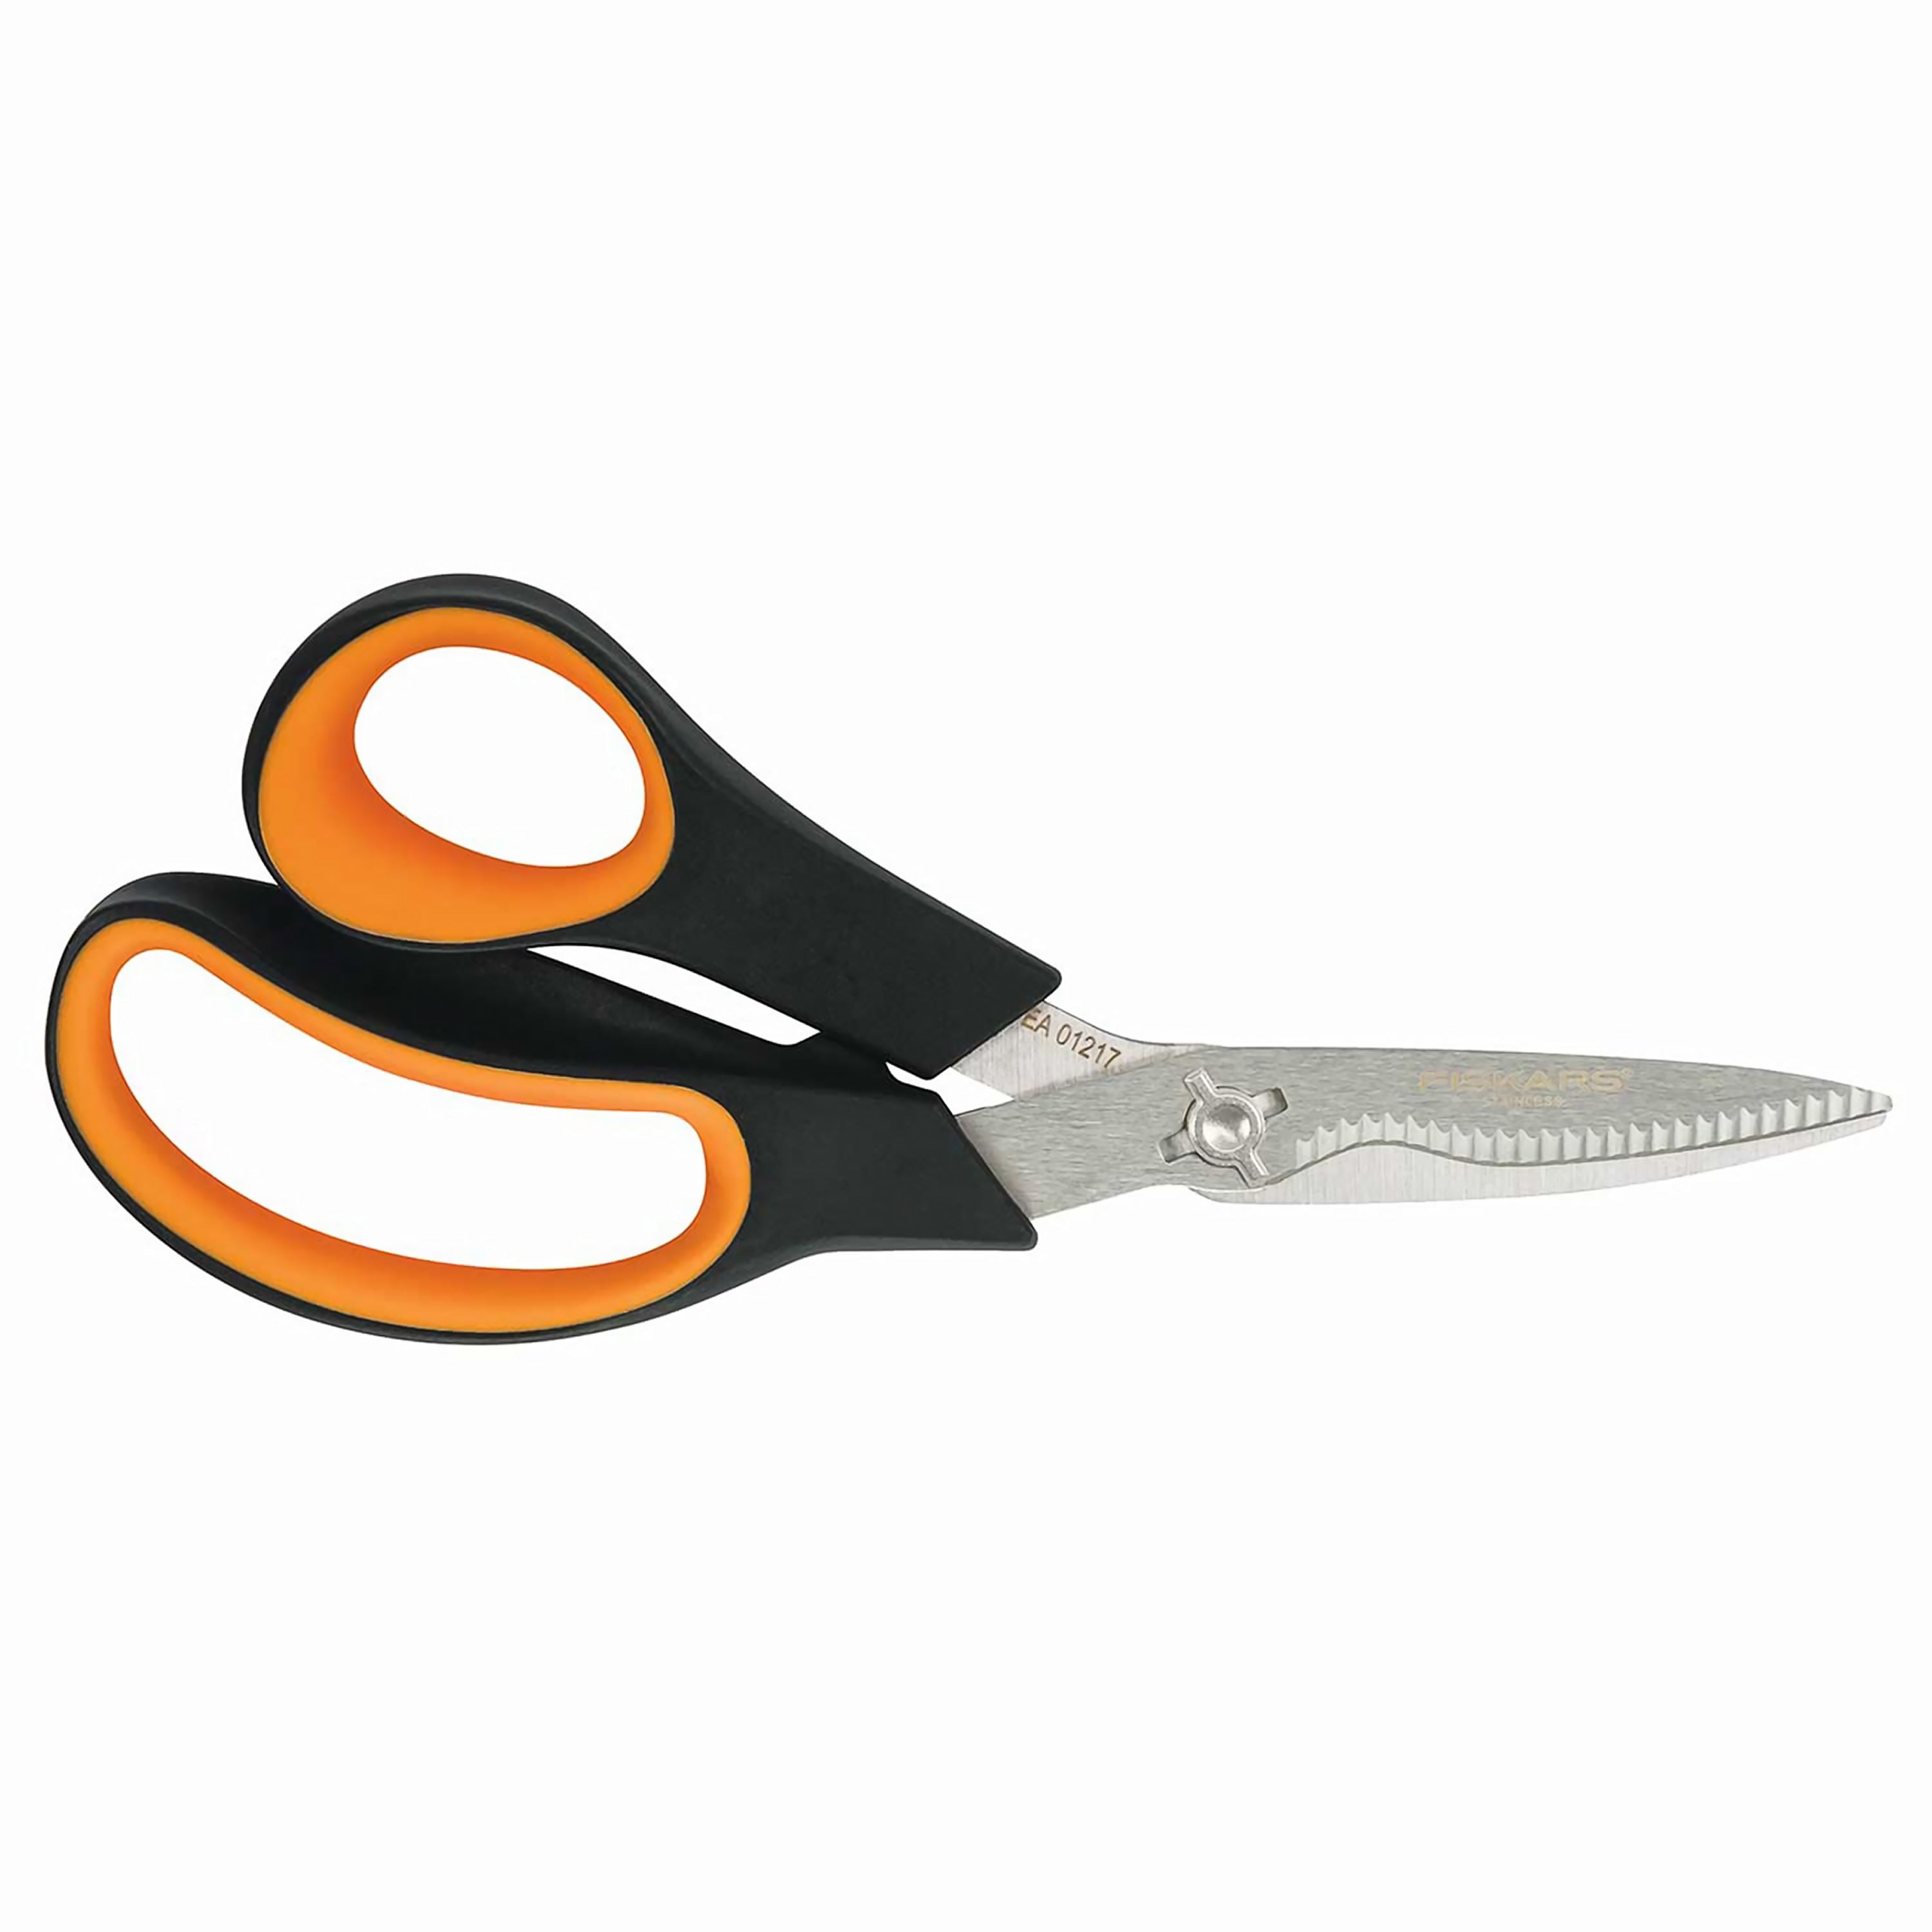 Fiskars Hand Punches, 0.25 Star, Pack of 3